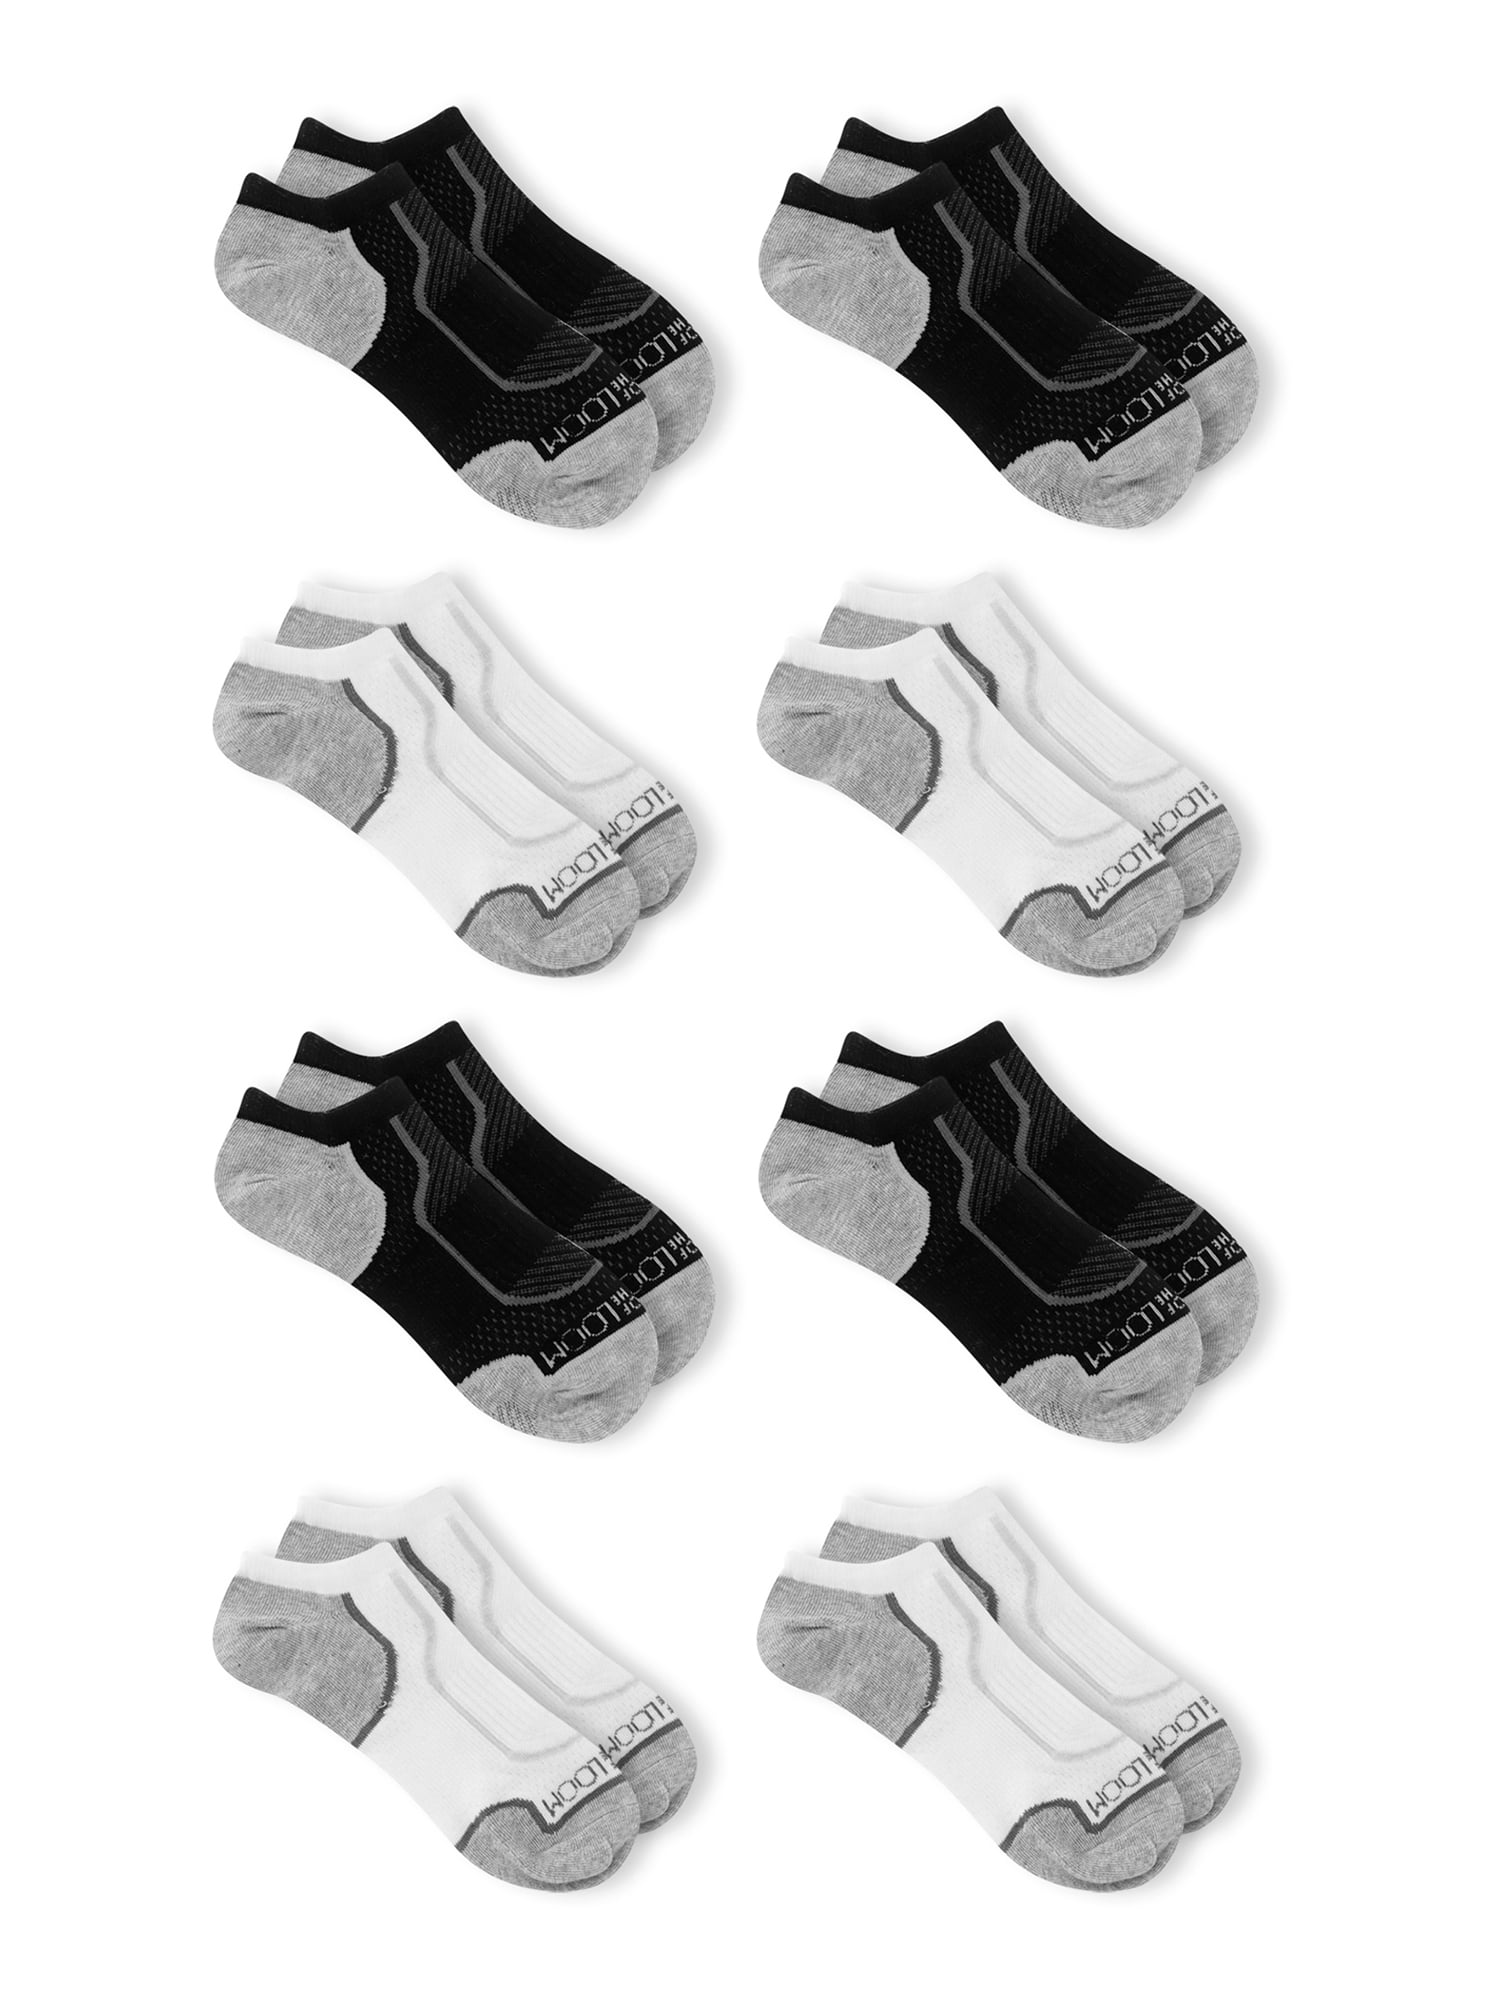 Fruit of the Loom Womens 6 Pack No Show Socks